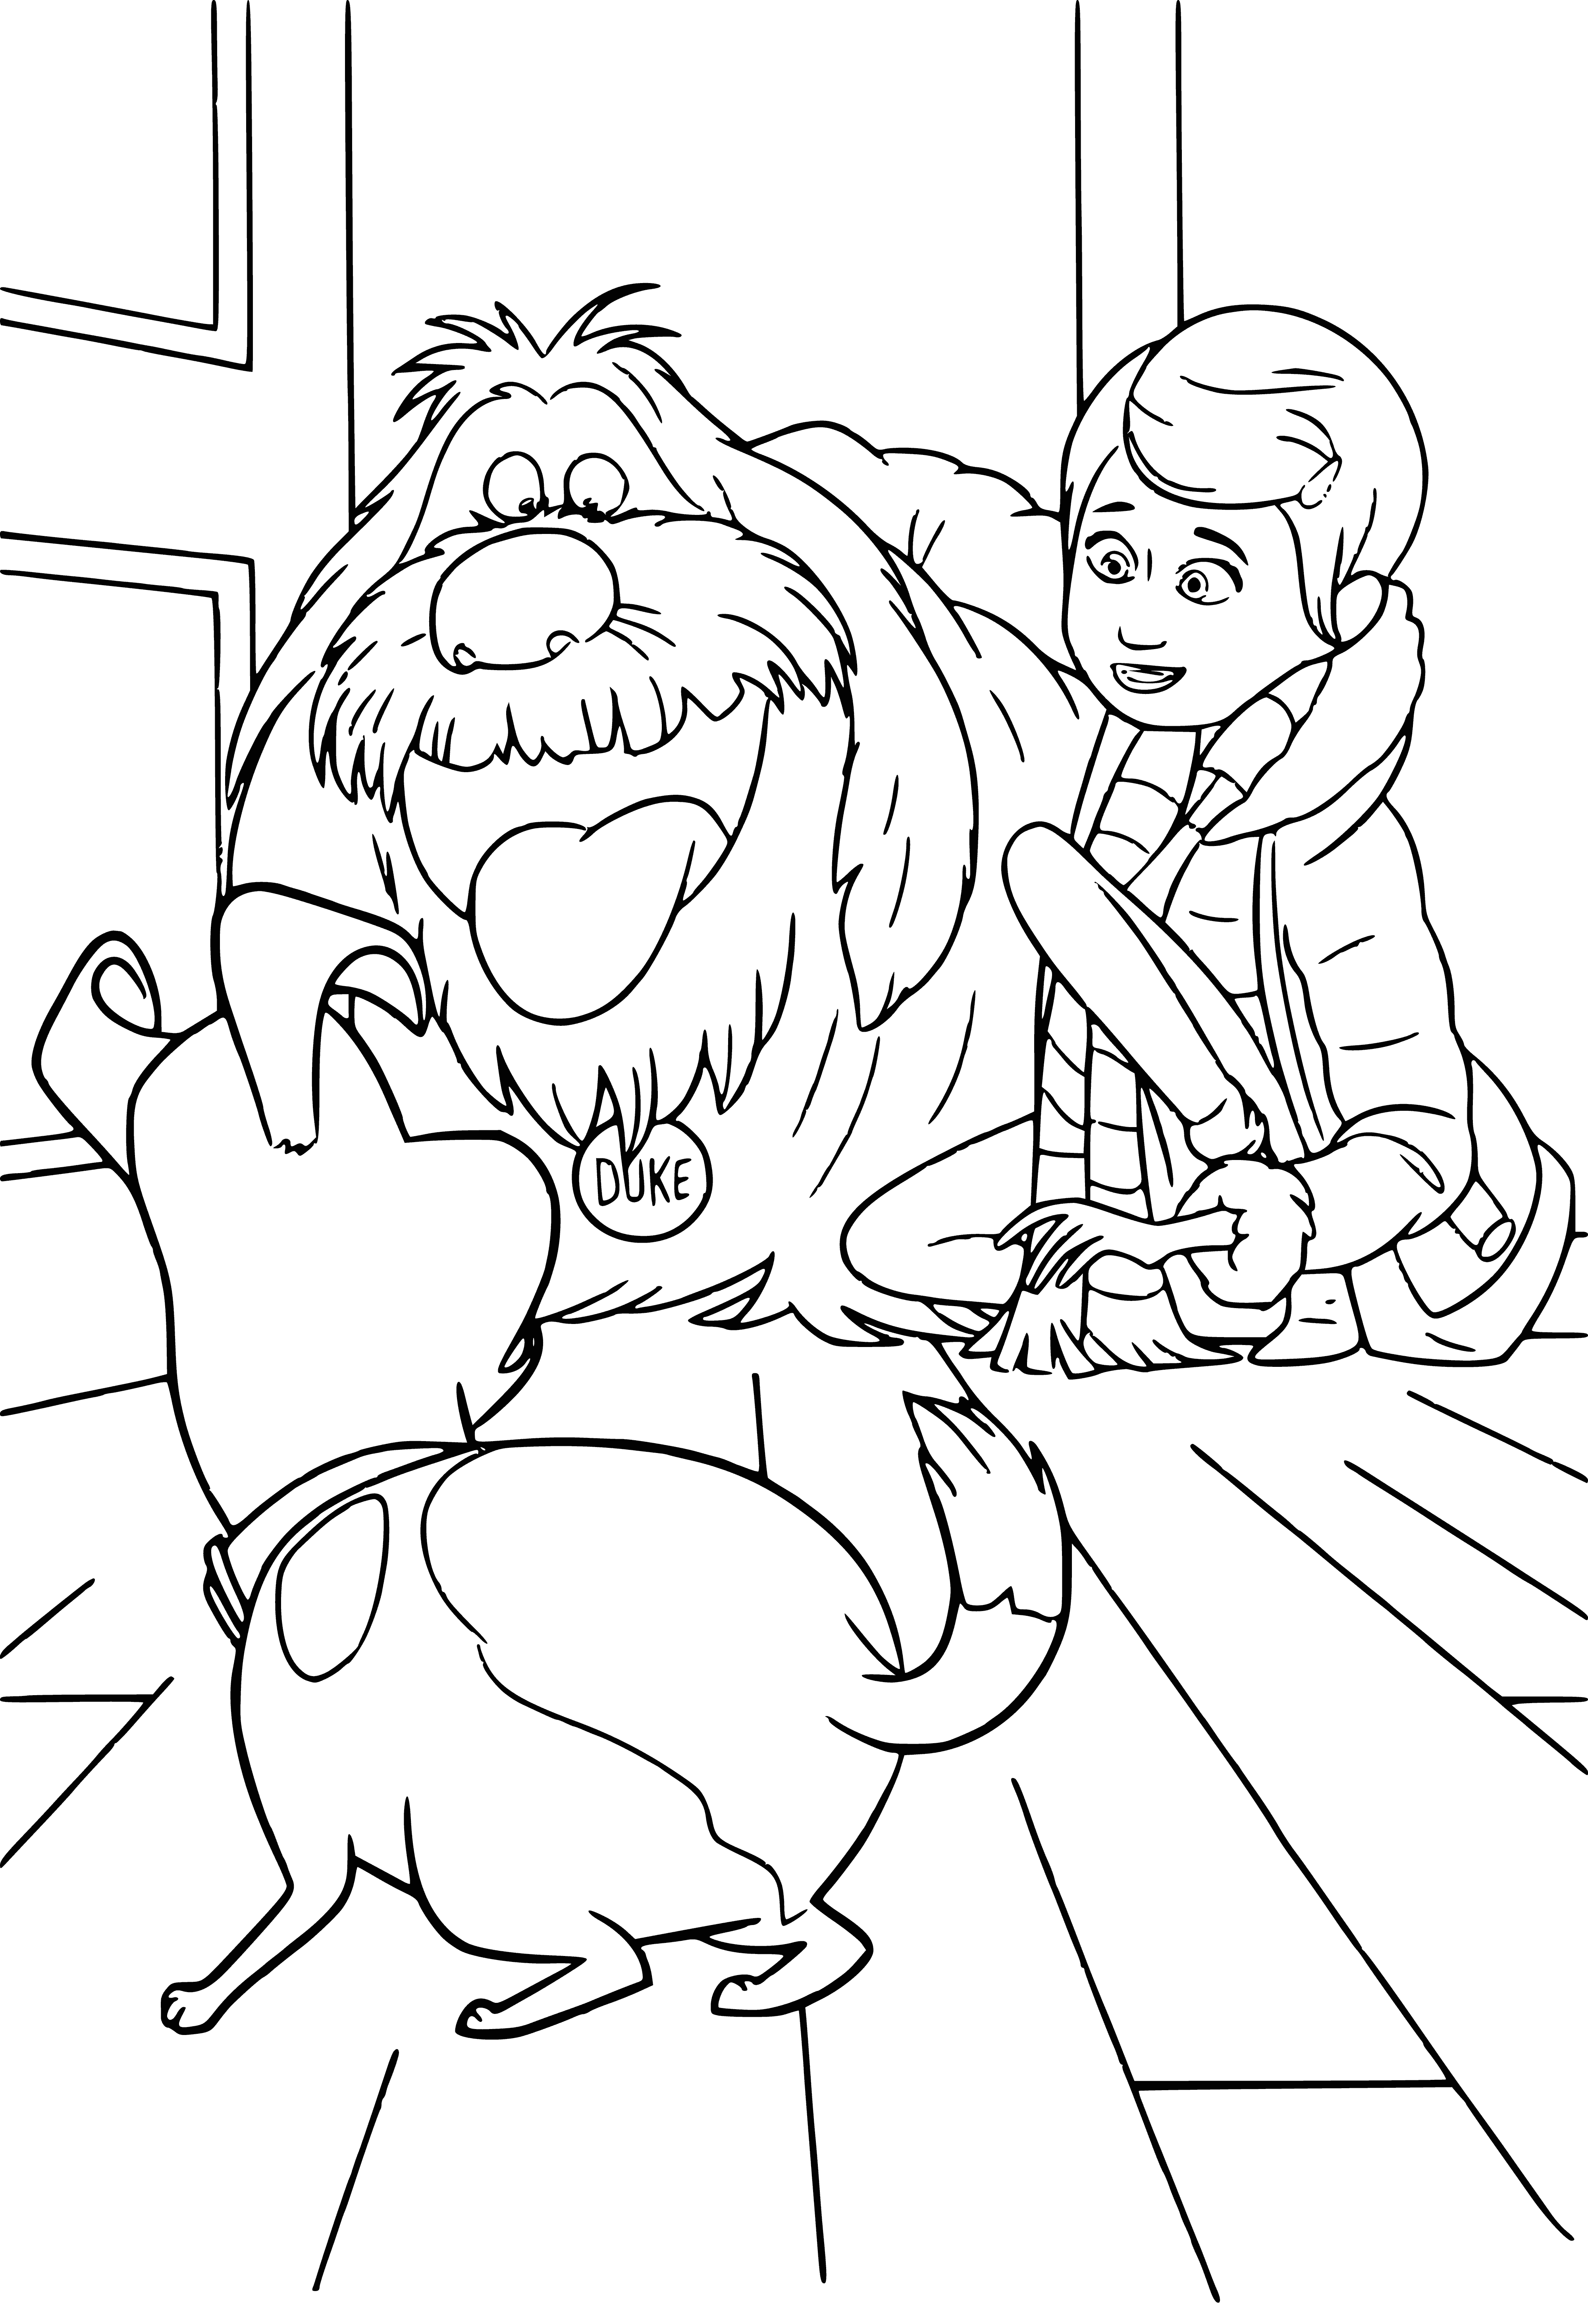 coloring page: Big brown dog Duke towers over scared white pup, both sitting on a blue mat.